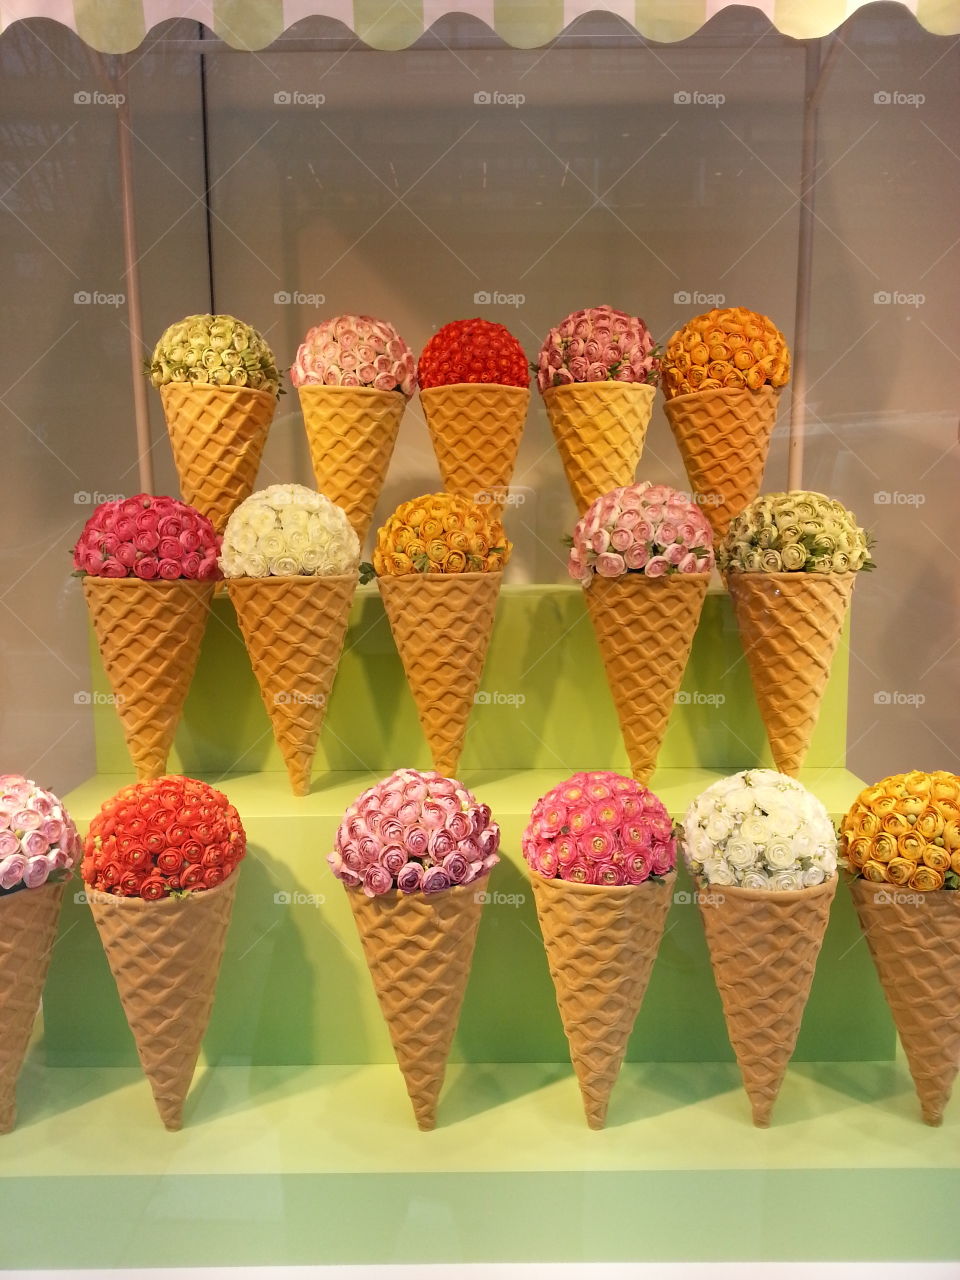 Flower Icecream. The photo was taken with my mobile camera in Stockholm. It was kept as advertised decoration at biggest shopping mall NK, Stockholm to attract customers.